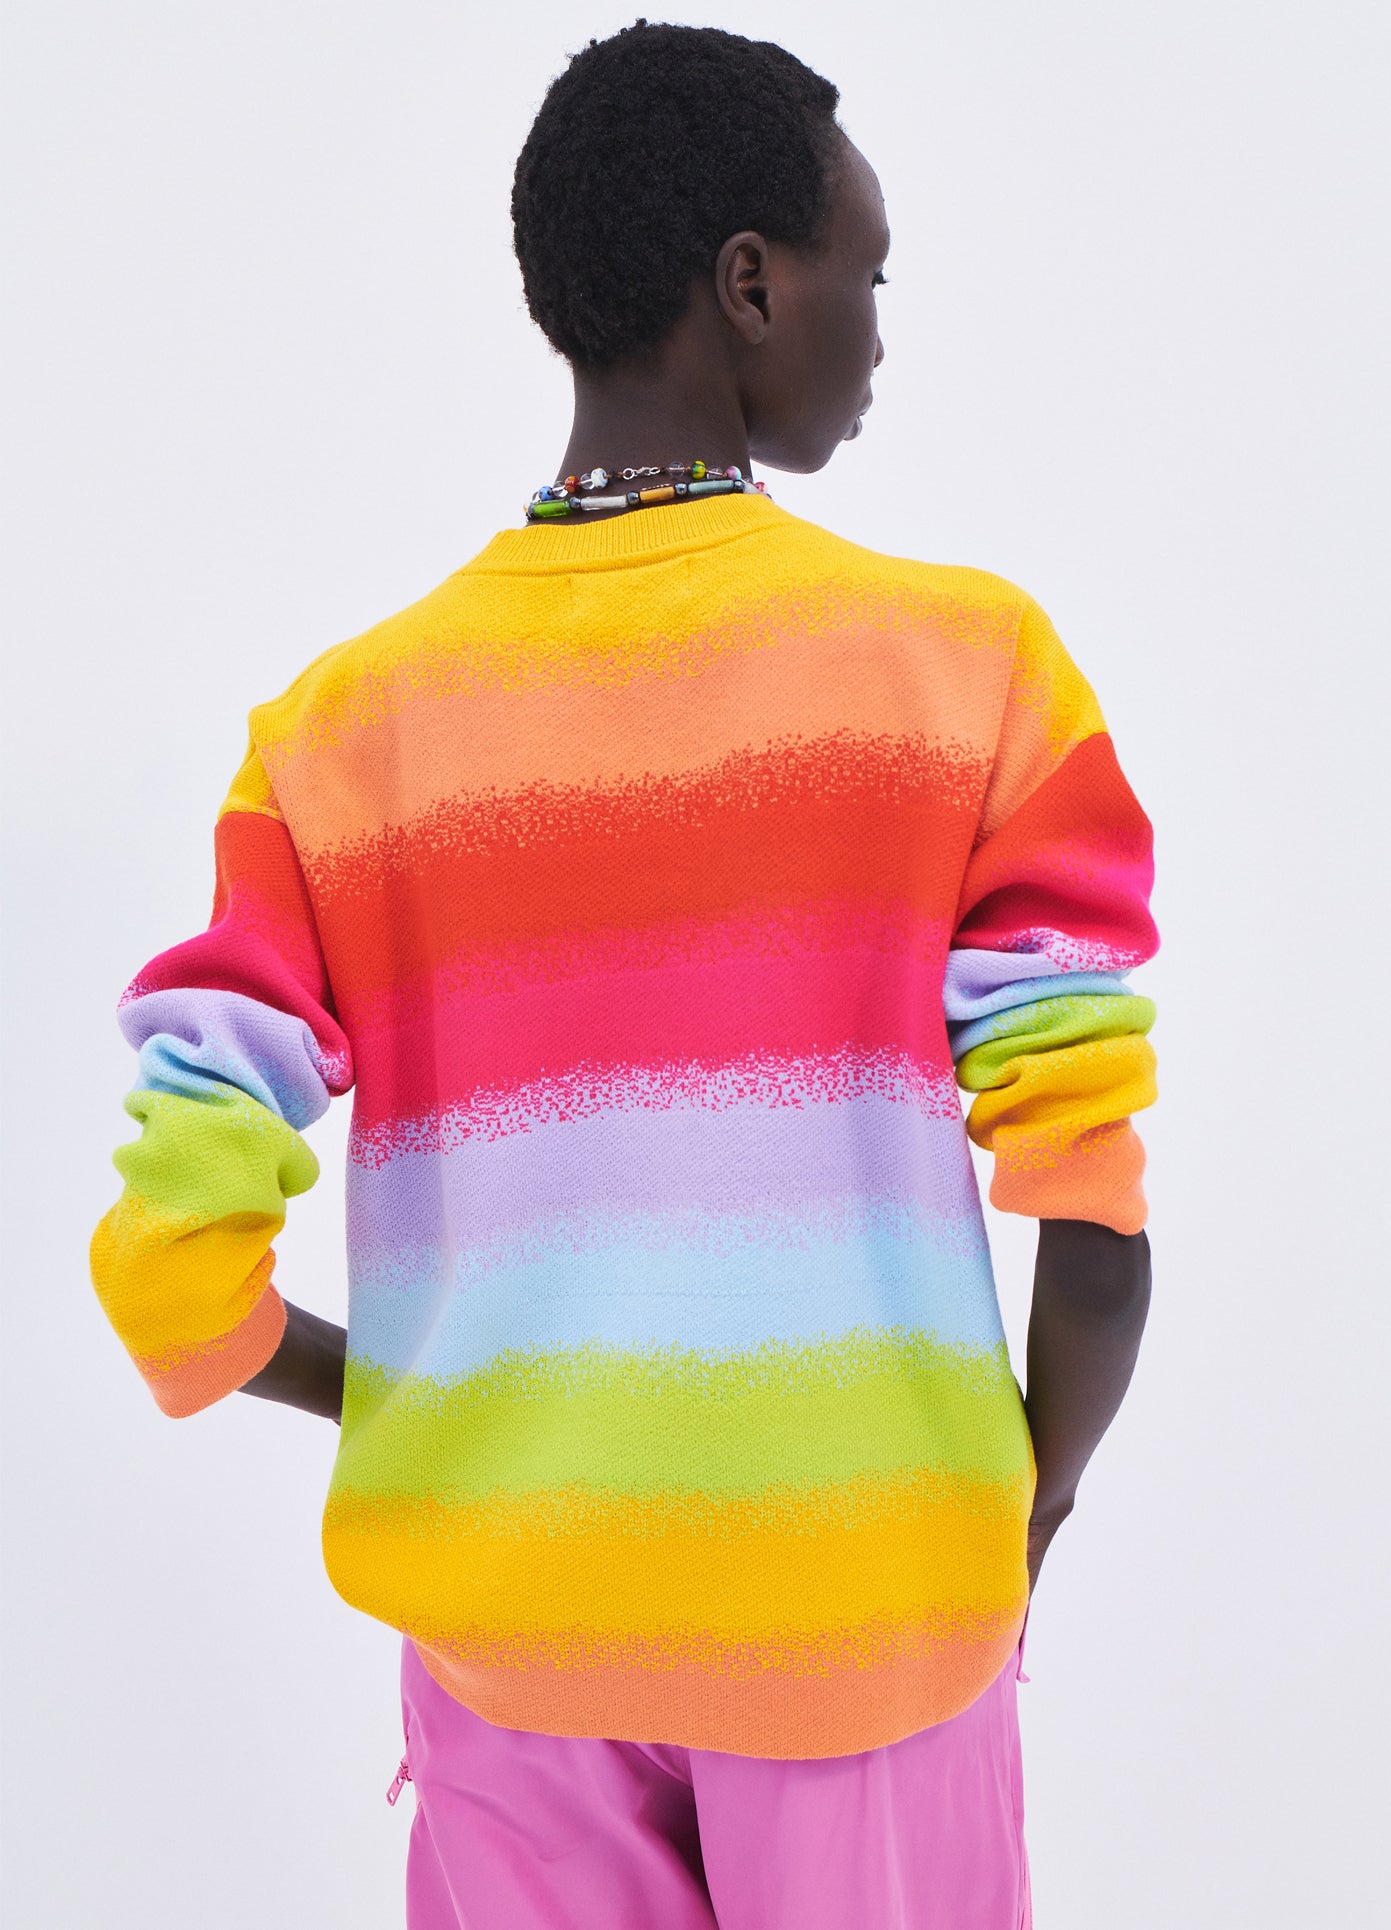 MONSE Blurry Stripe Sweater in Multi Colors on model back view